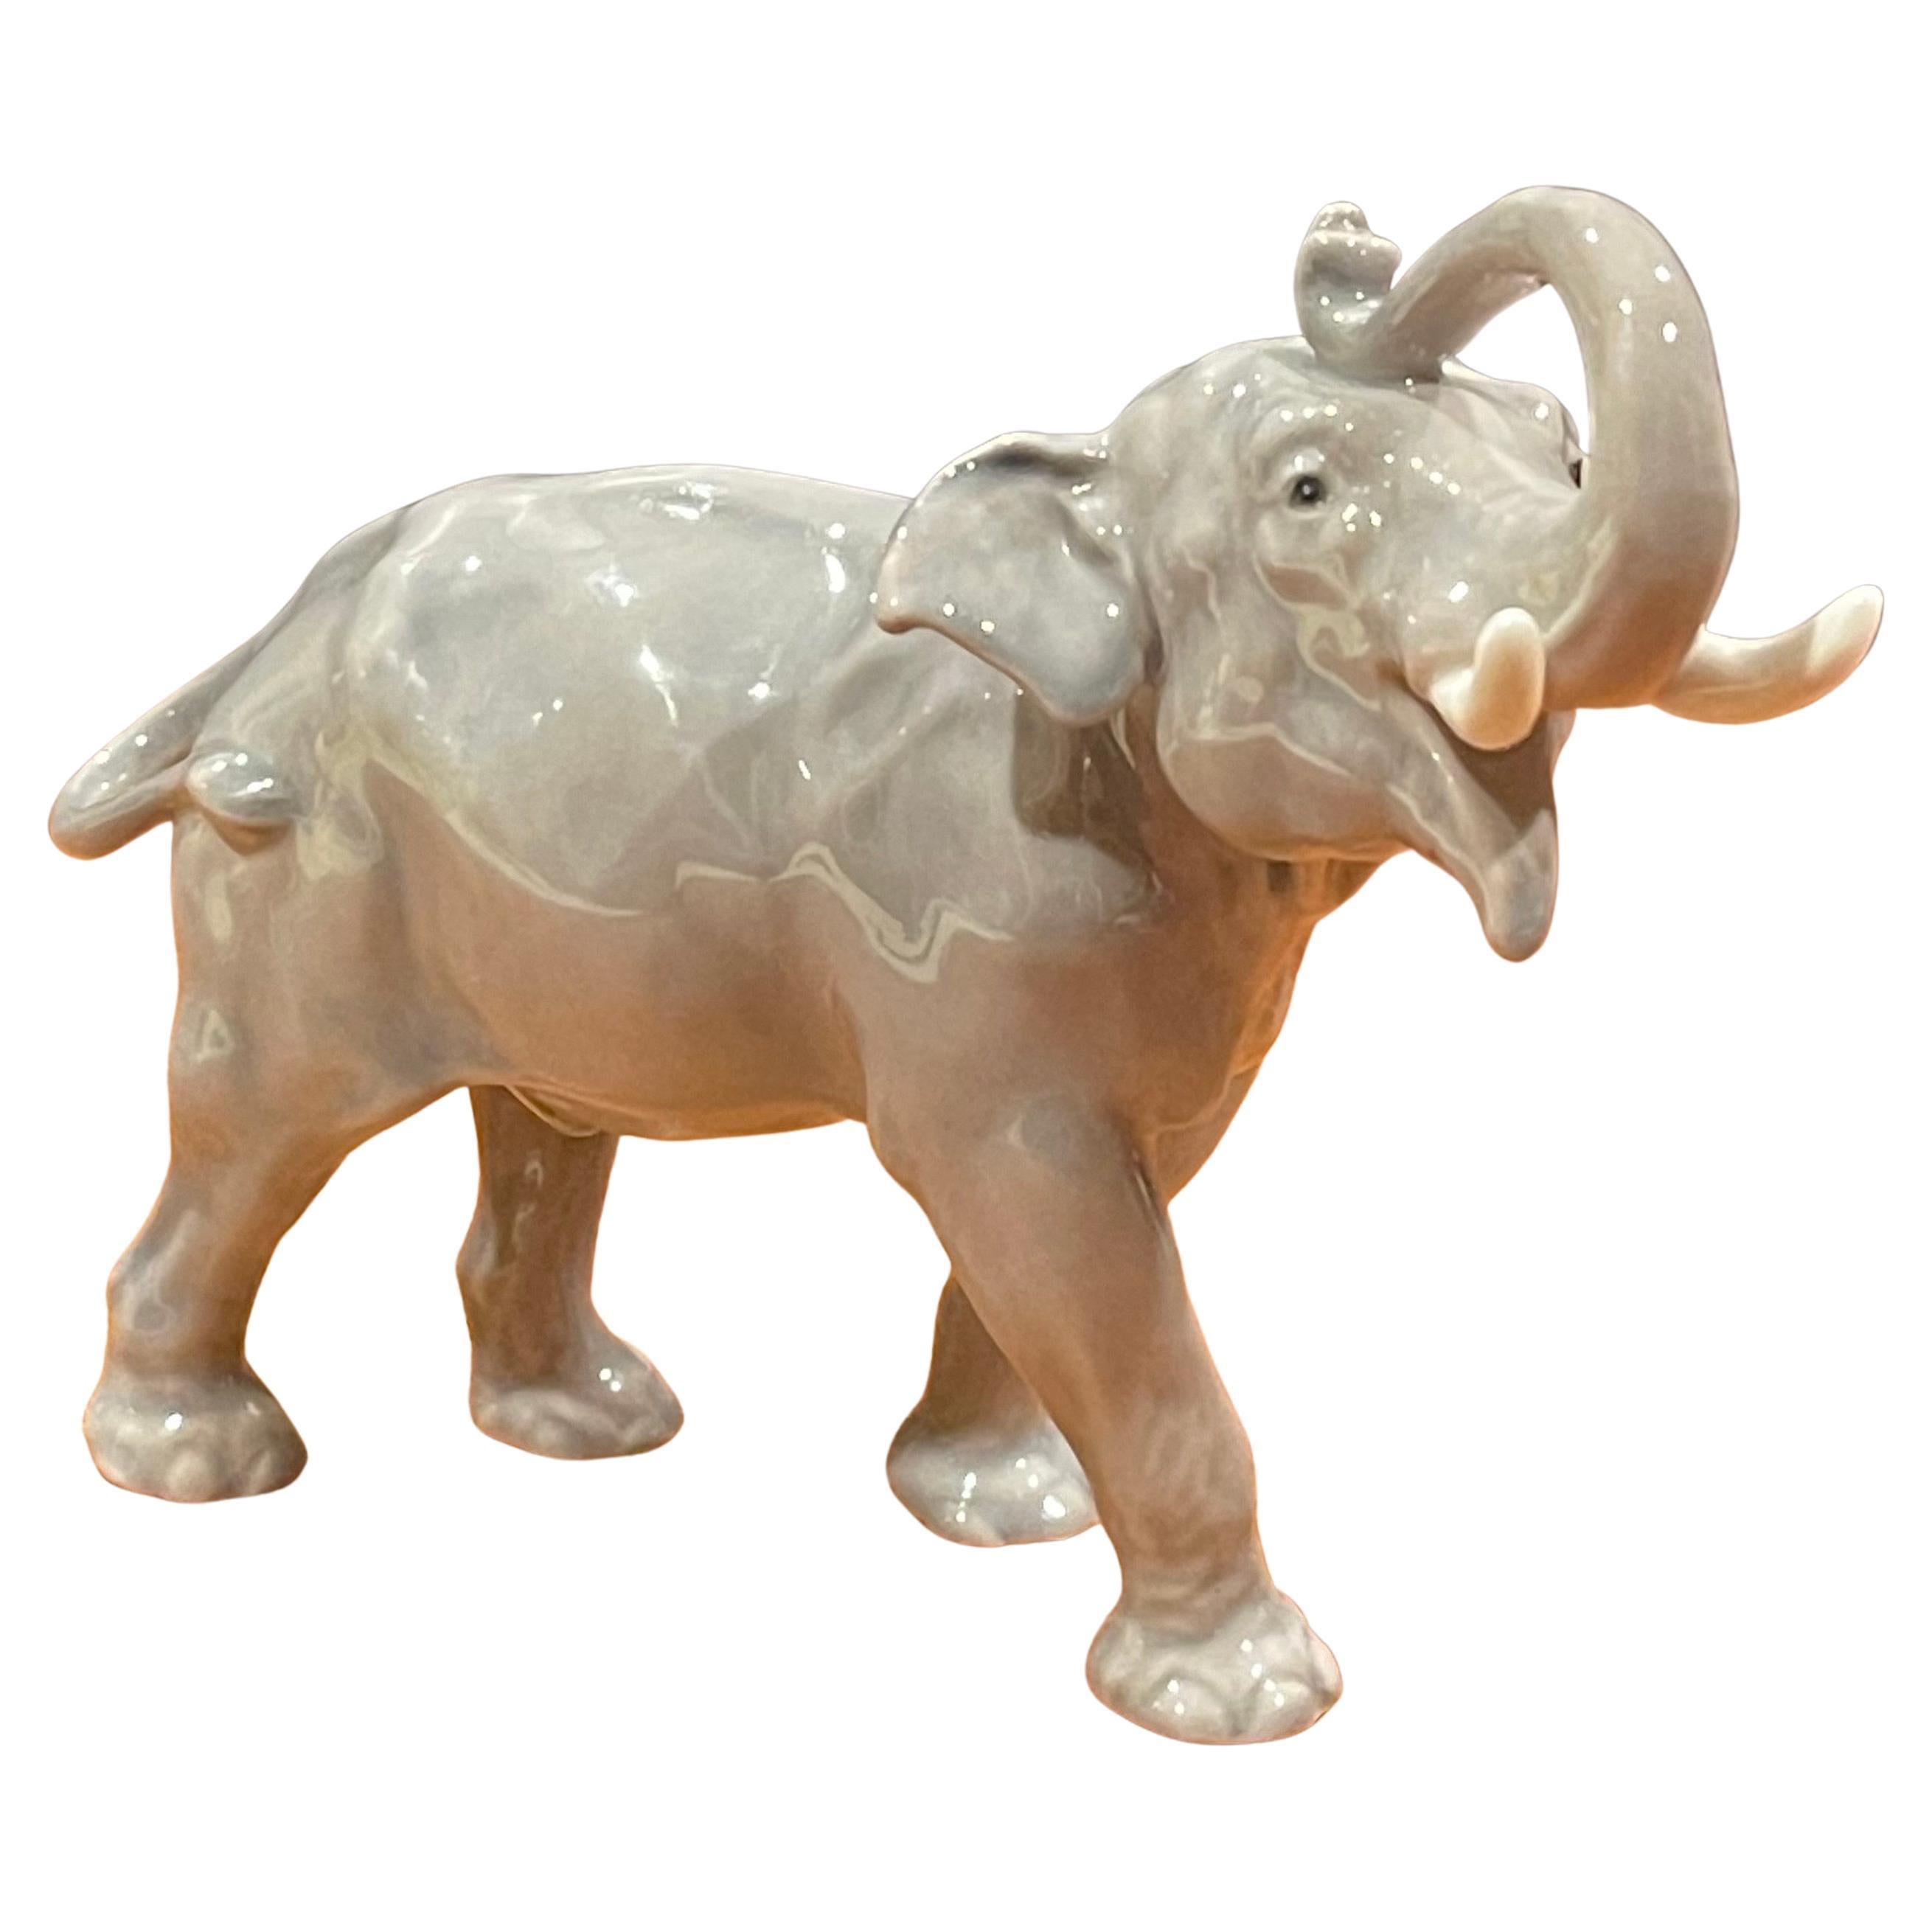 Hand Painted Porcelain Elephant Sculpture by Bing & Grondahl For Sale